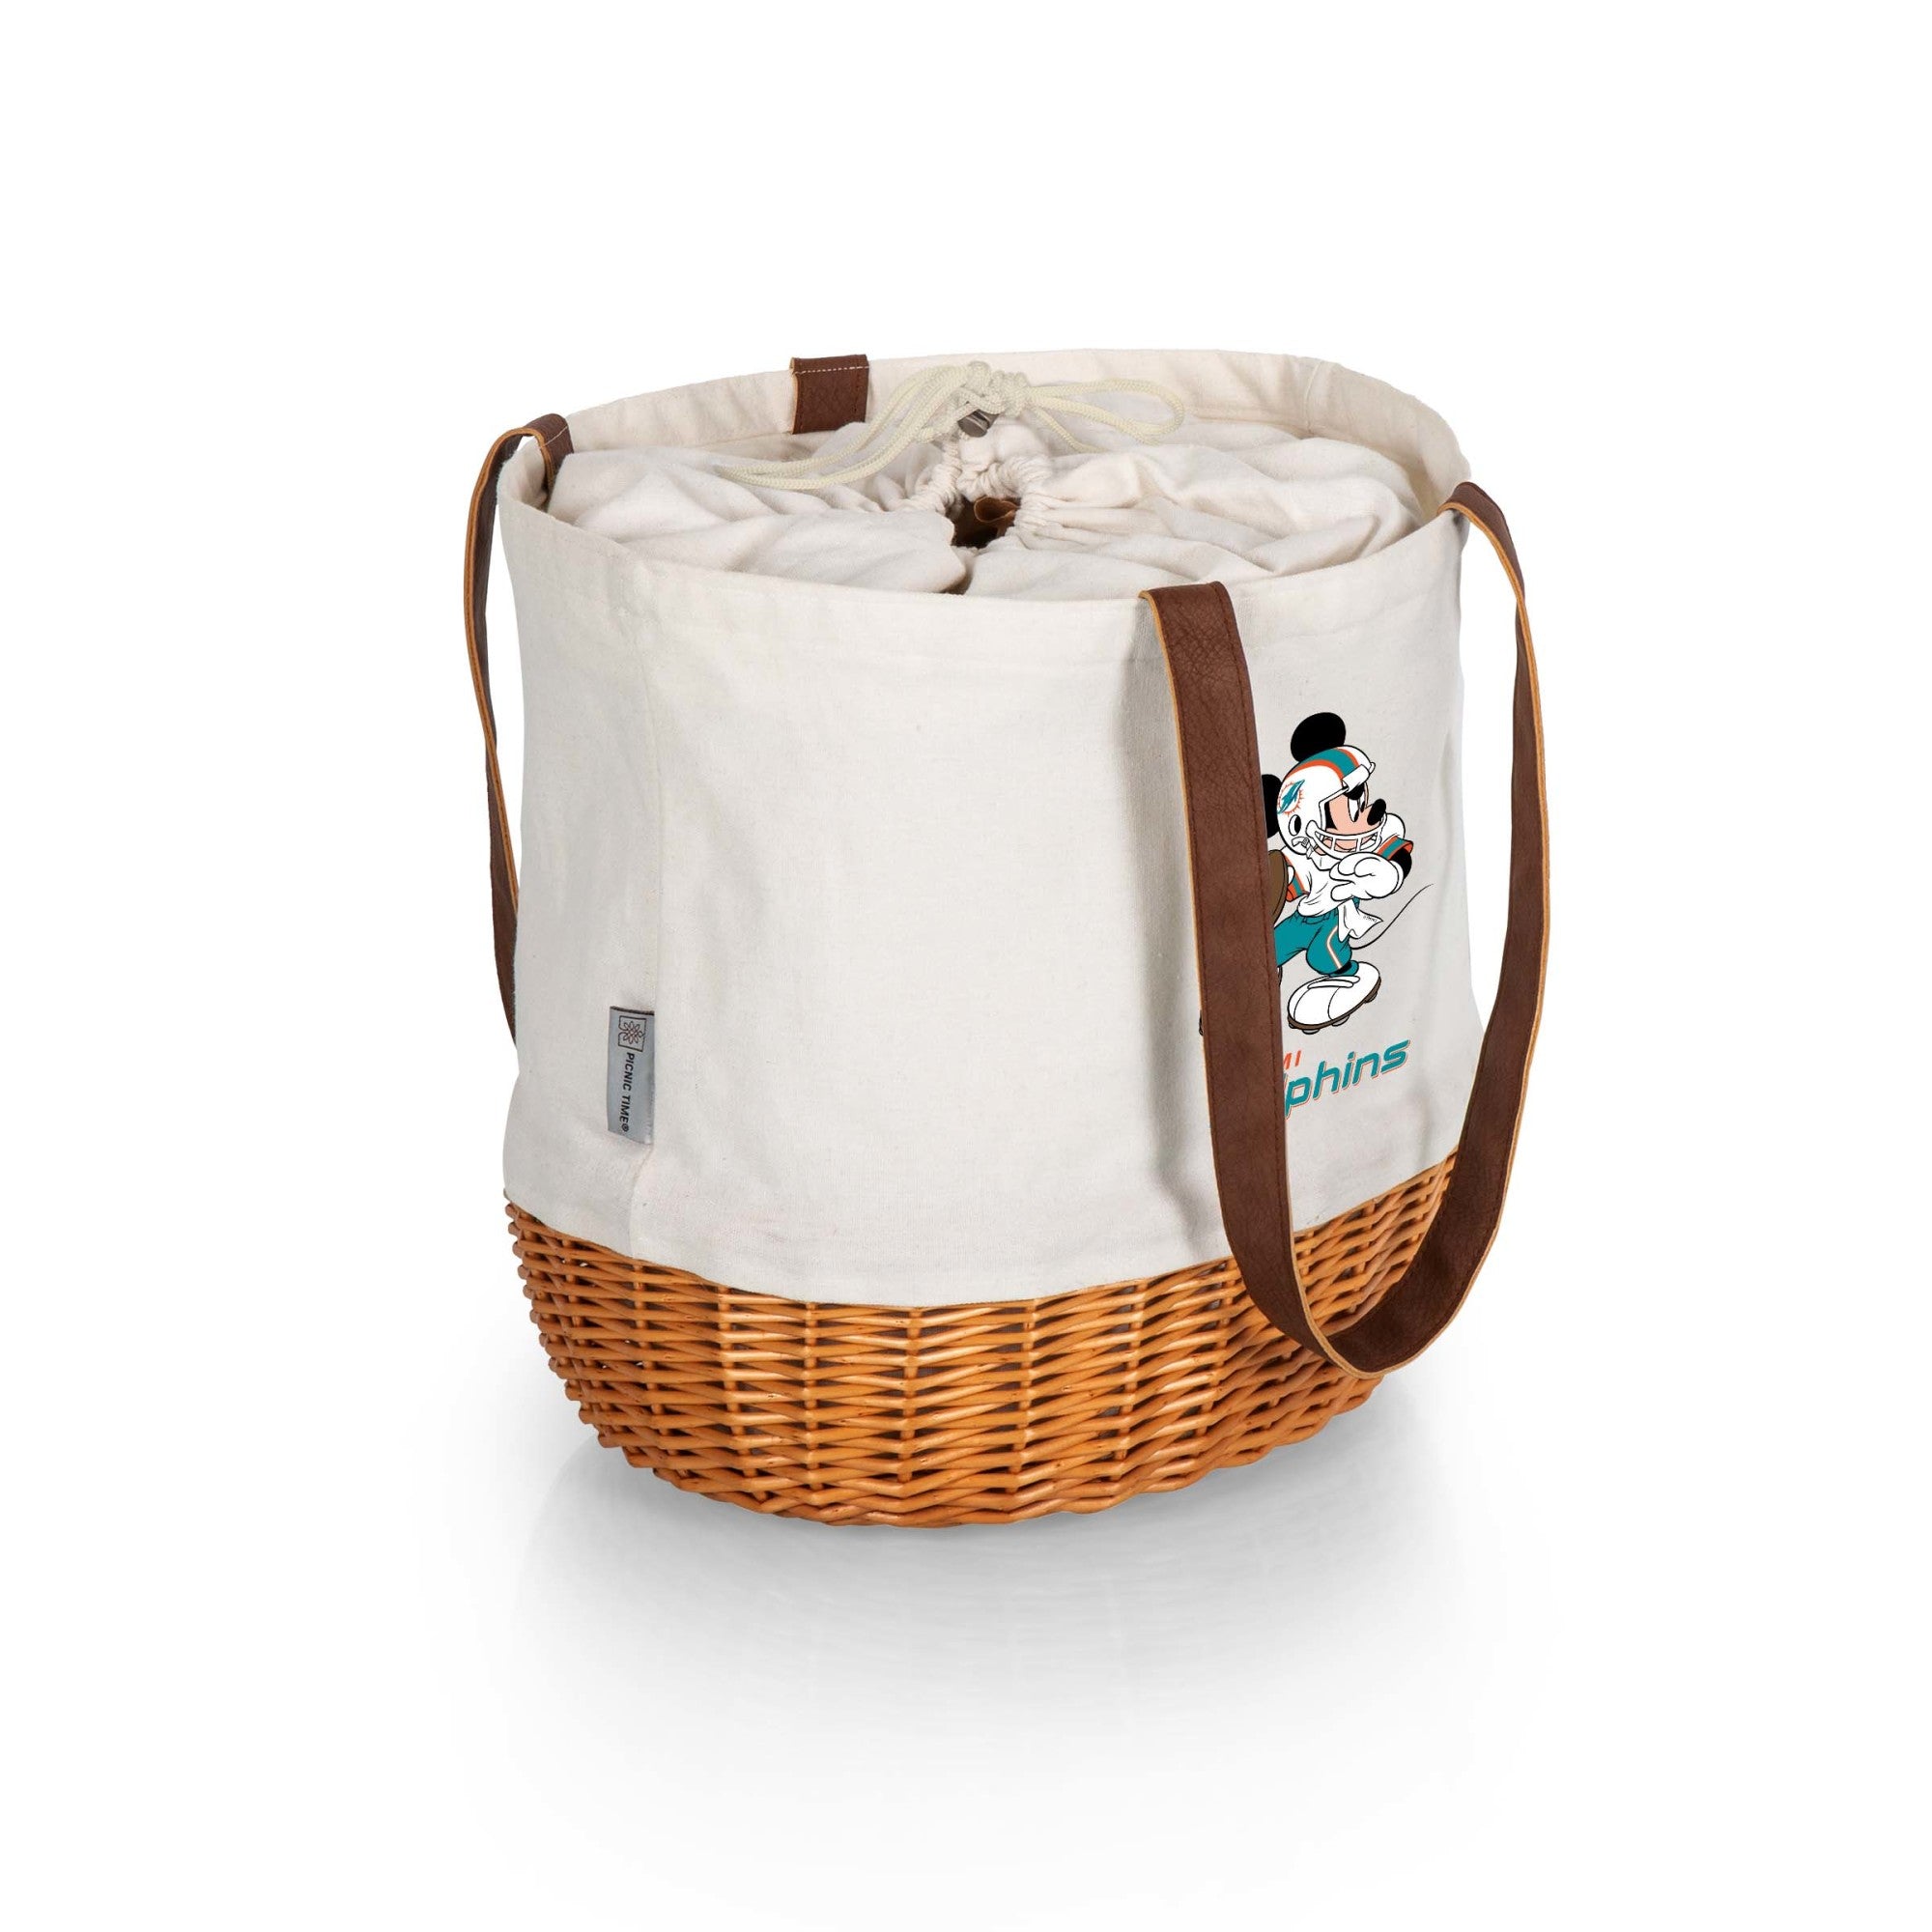 Mickey Mouse - Miami Dolphins - Coronado Canvas and Willow Basket Tote